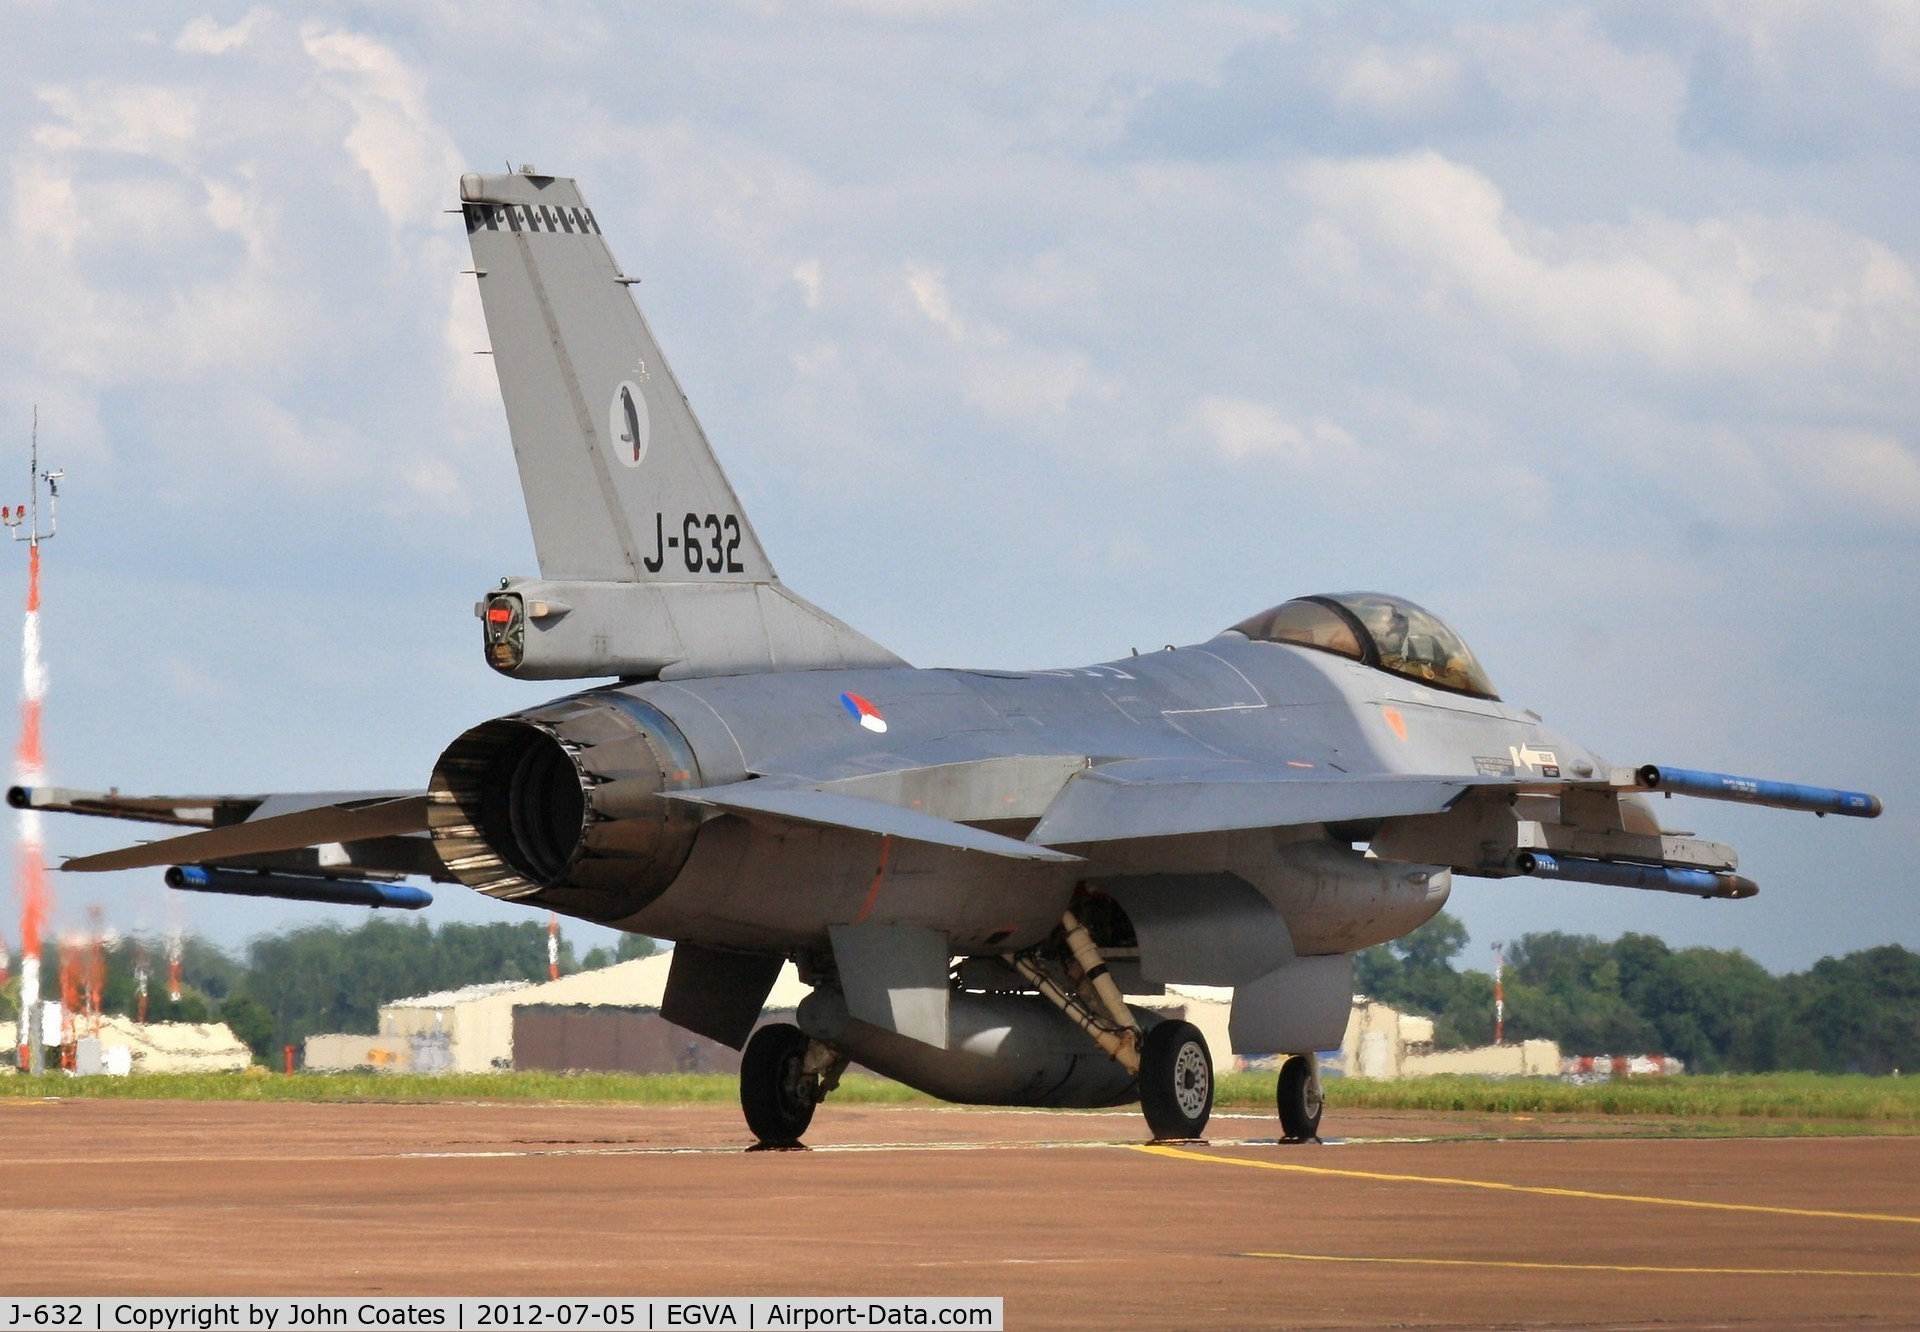 J-632, General Dynamics F-16A Fighting Falcon C/N 6D-64, Arriving for RIAT